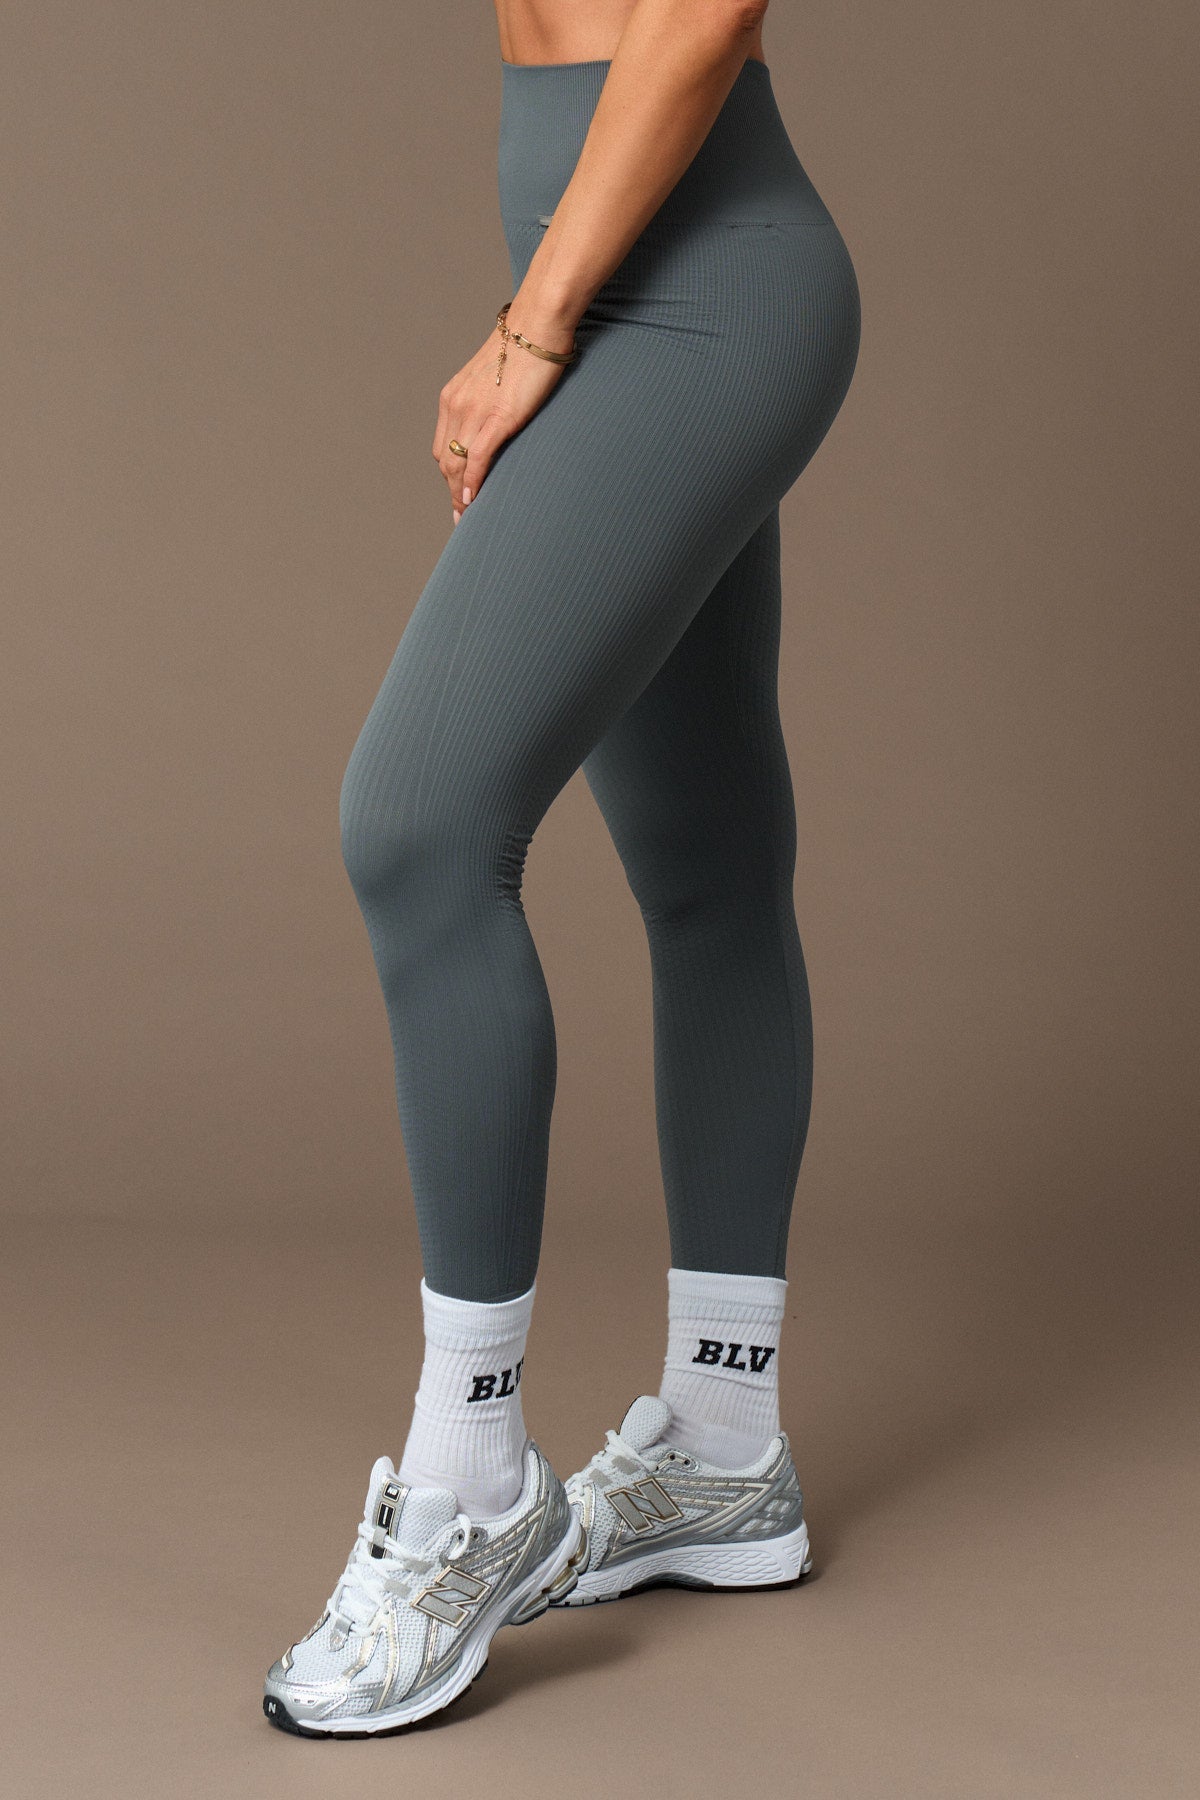 Flow Legging in Grey-Long Leggings-Store Clothing Sustainable Recycled Yoga Leggings Women On-line Barcelona Believe Athletics Sustainable Recycled Yoga Clothes